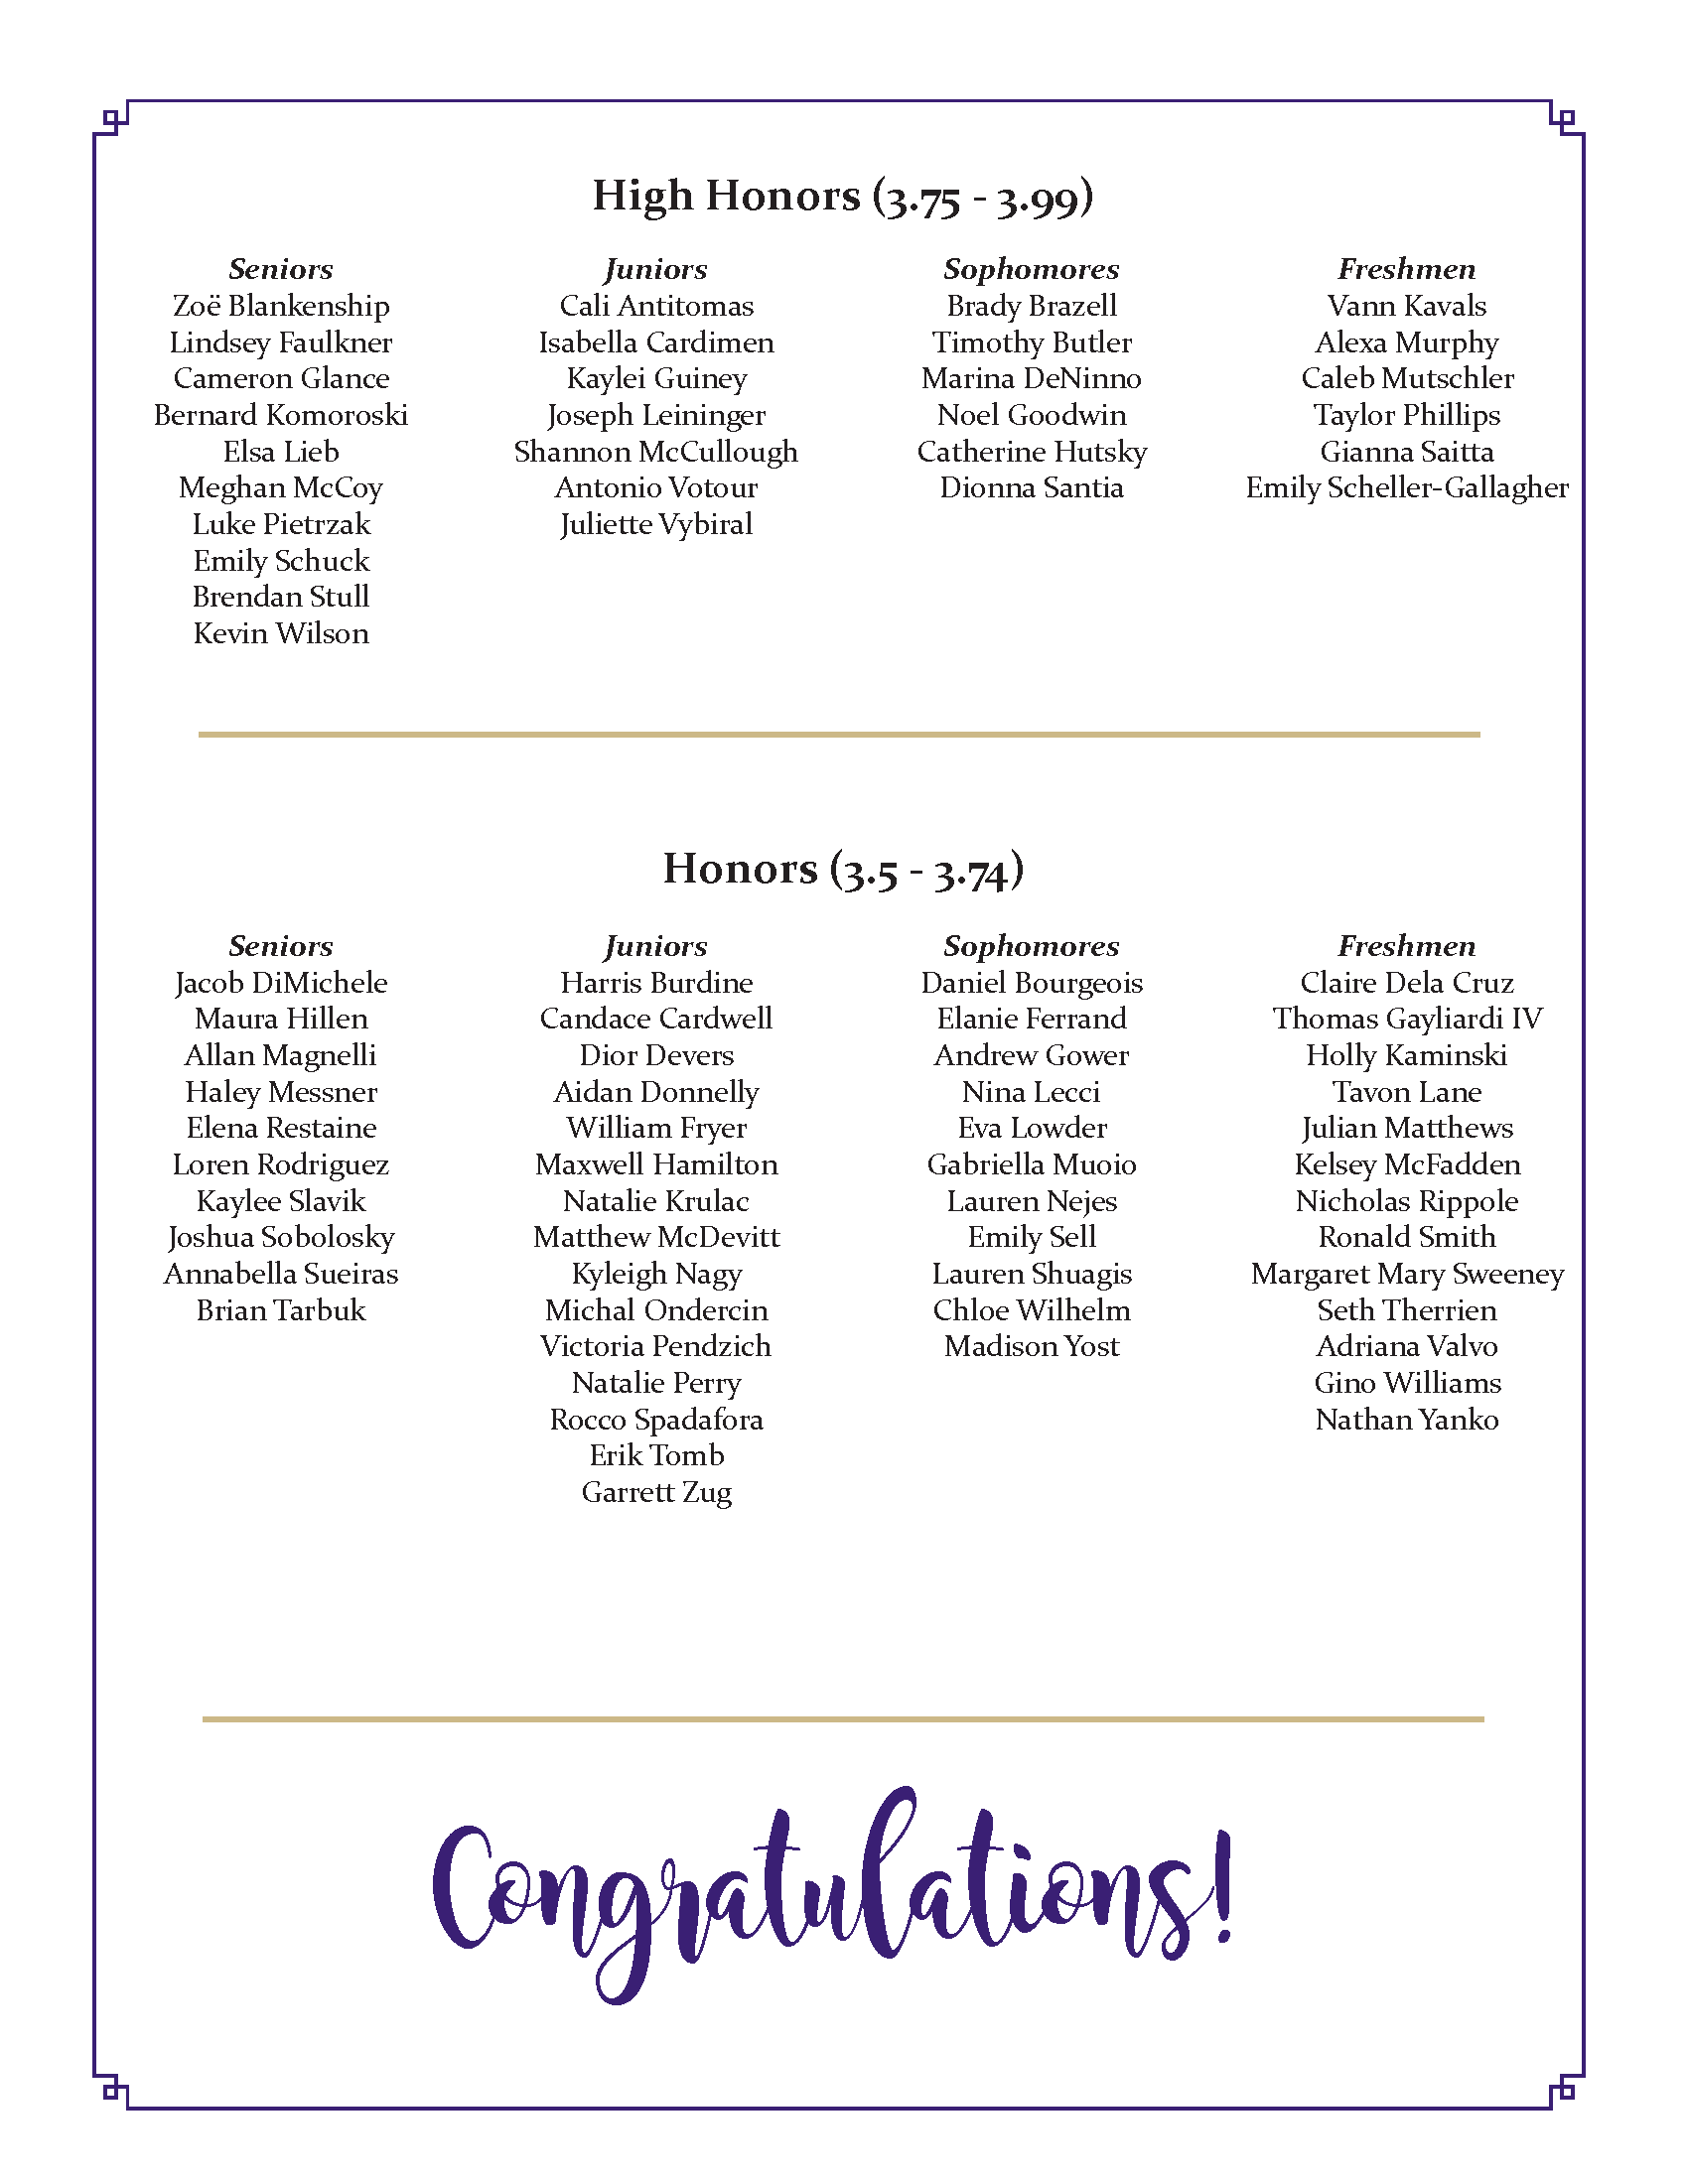 image of 2nd page of olsh honor roll